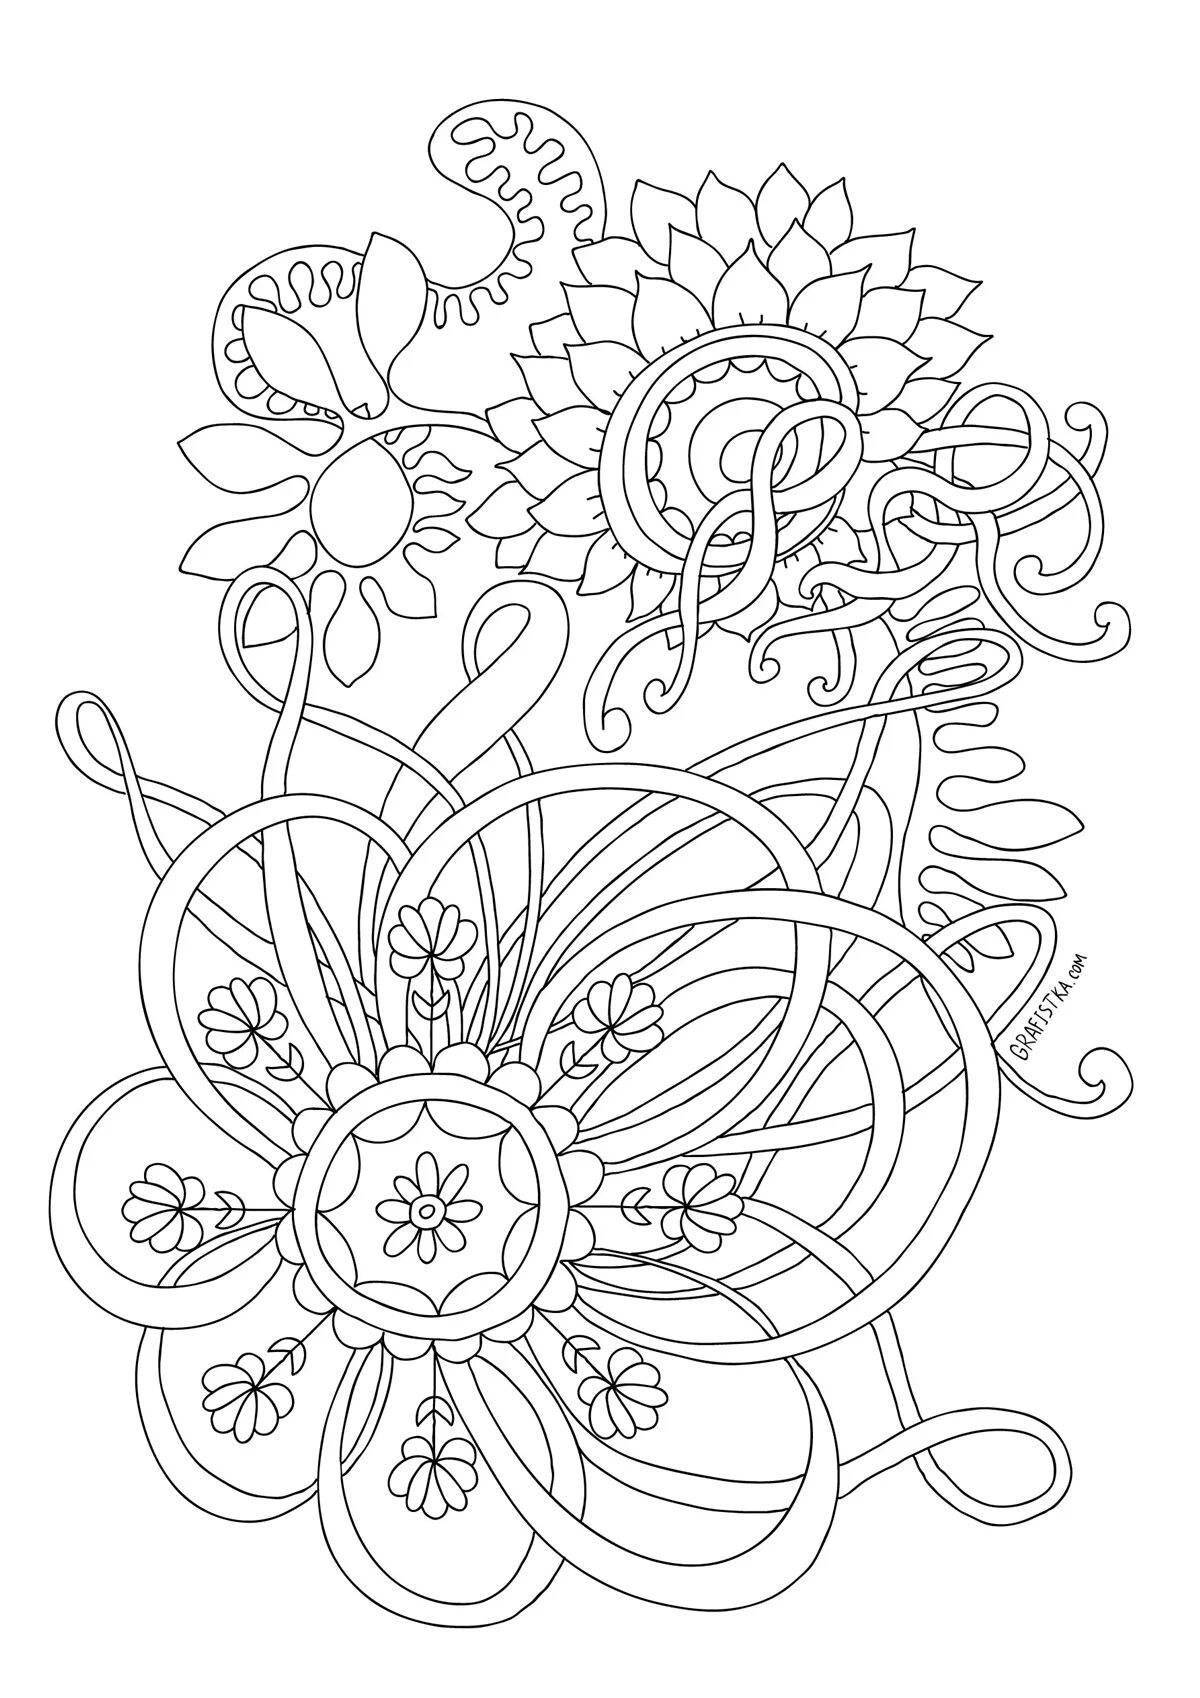 Fun simple coloring book for adults